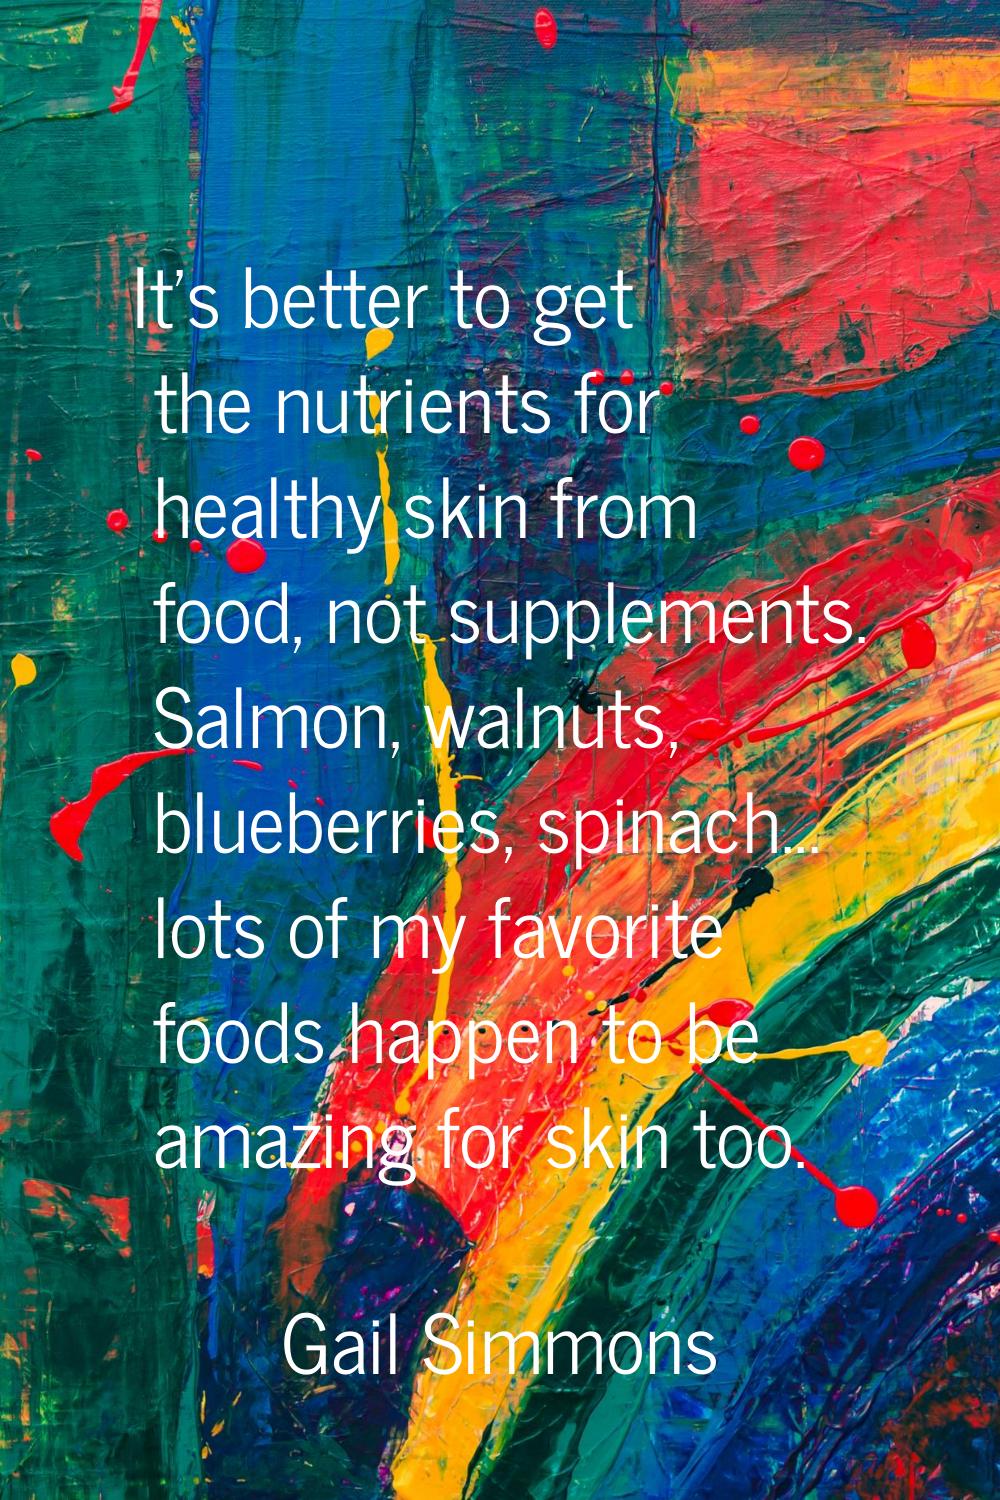 It's better to get the nutrients for healthy skin from food, not supplements. Salmon, walnuts, blue